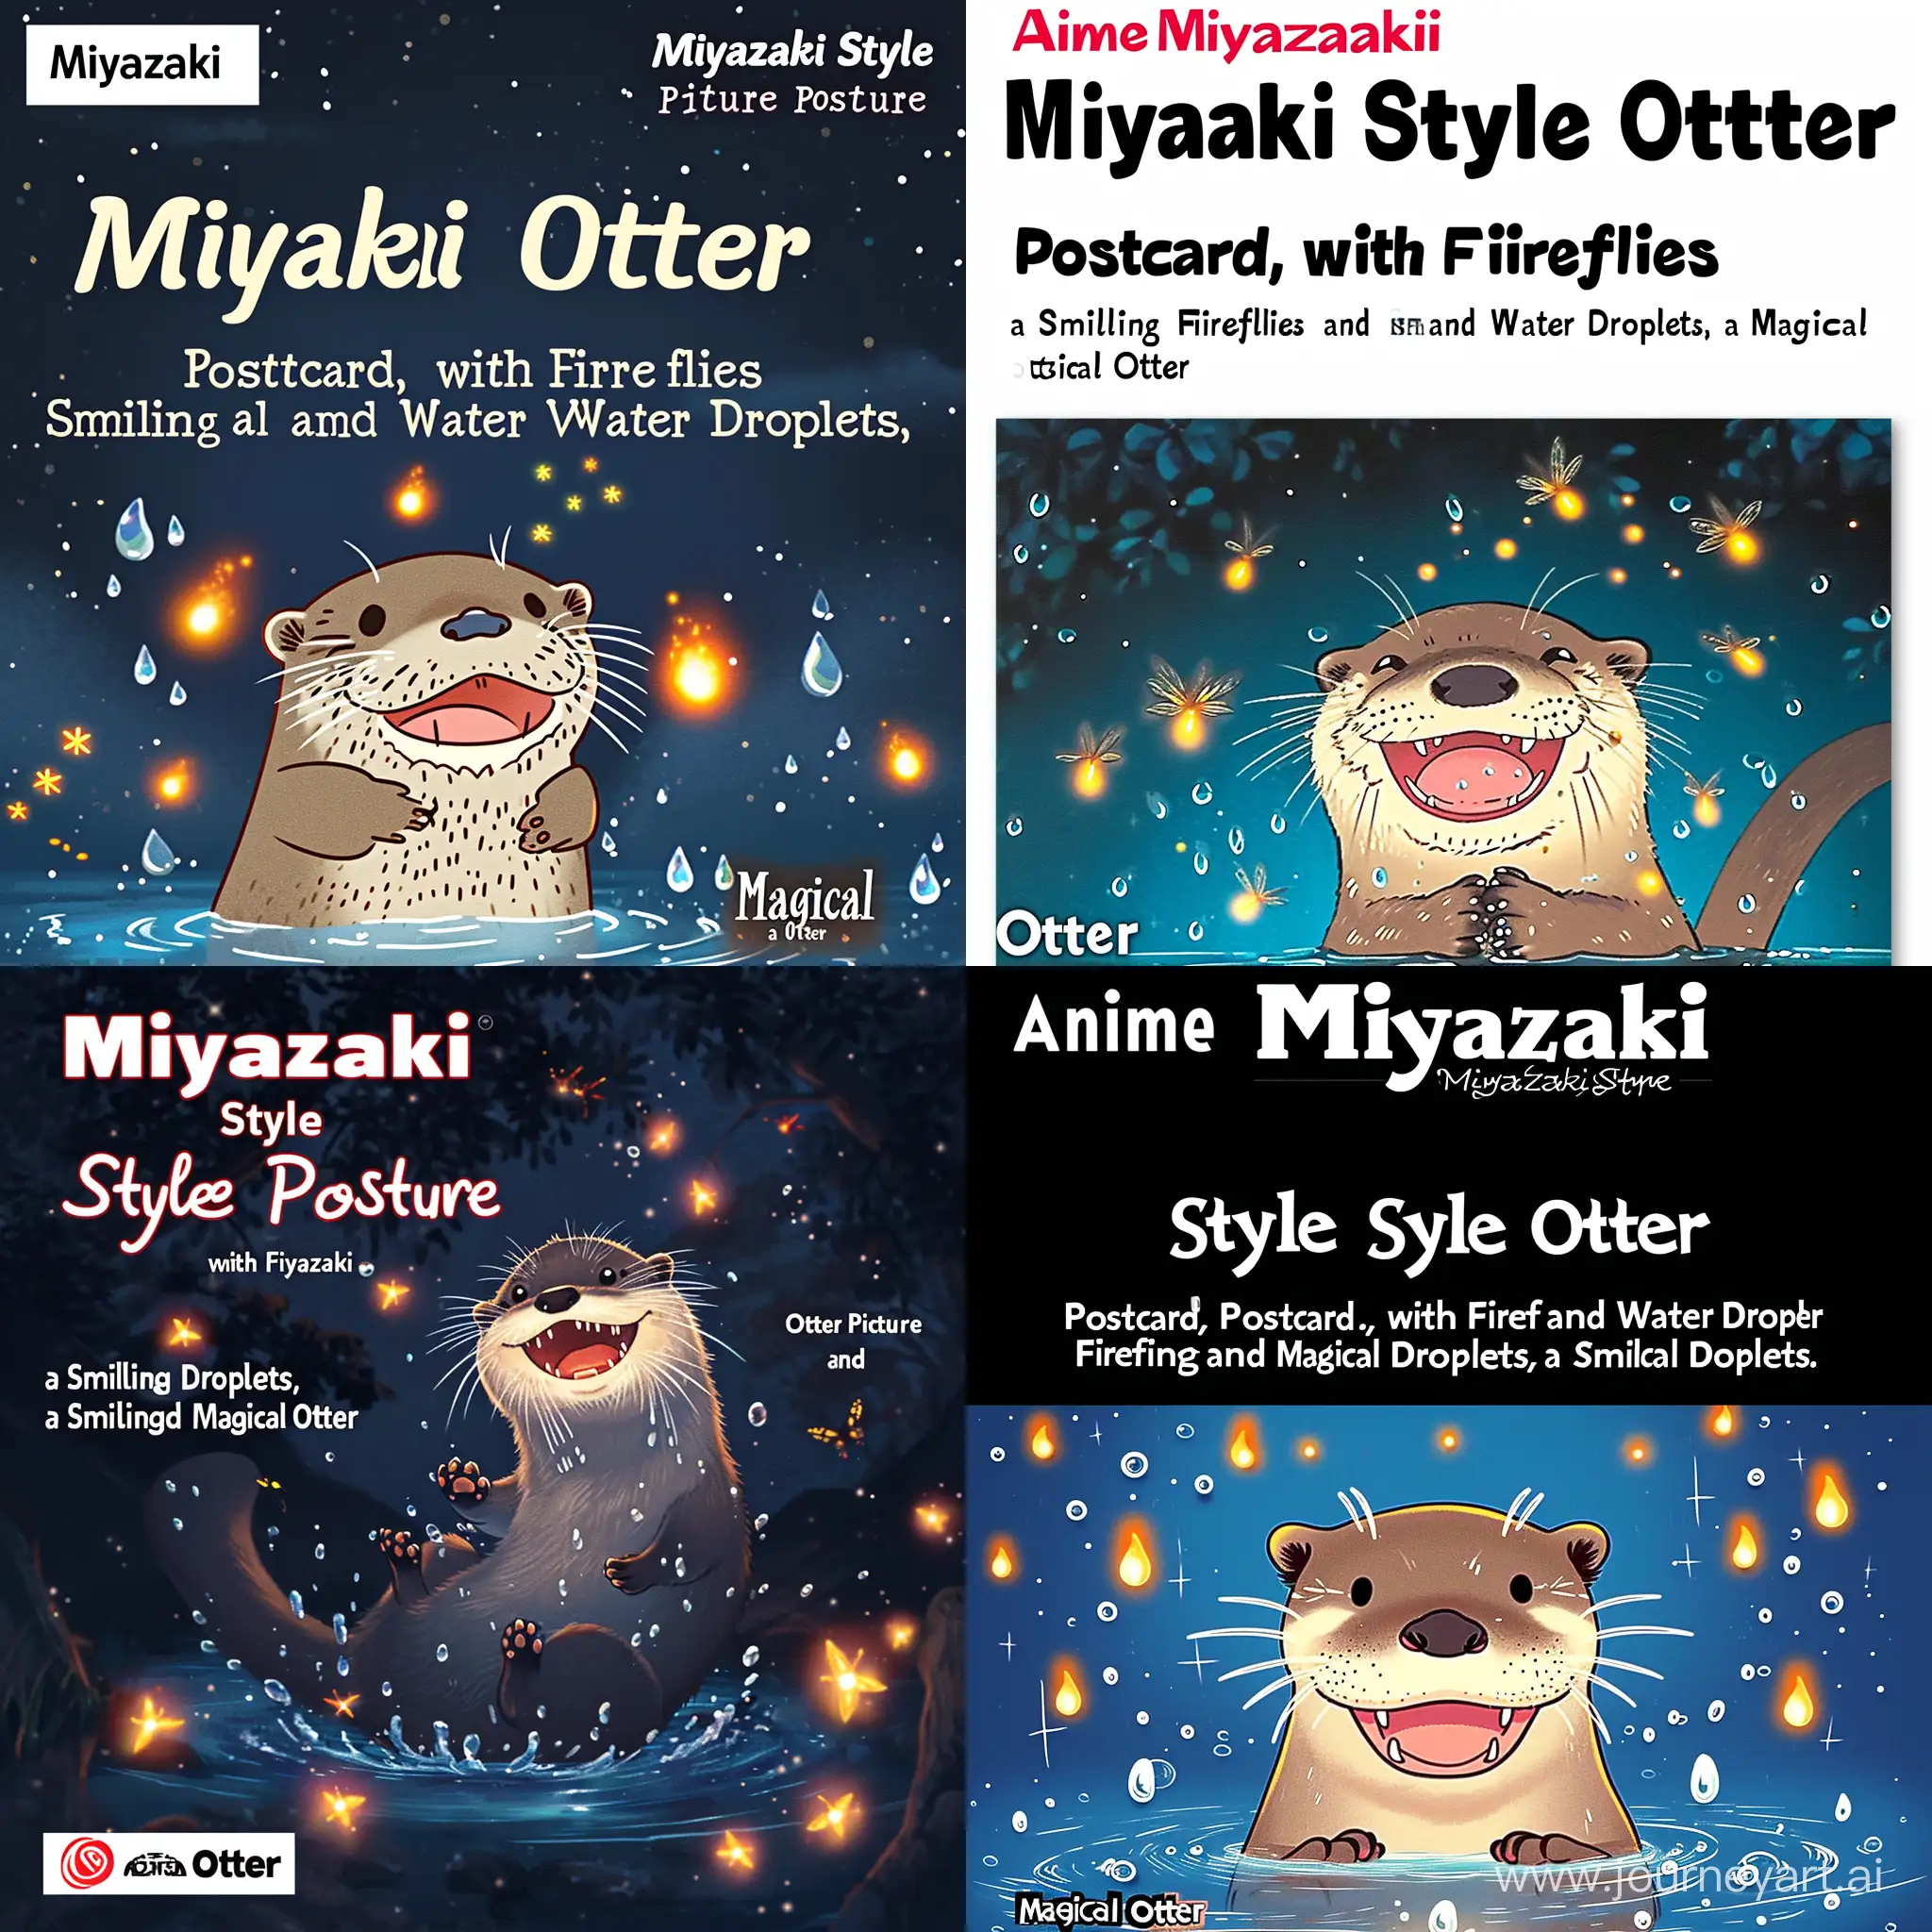 “Anime Miyazaki Style Otter Picture Postcard, with Fireflies and Water Droplets, a Smiling and Magical Otter”